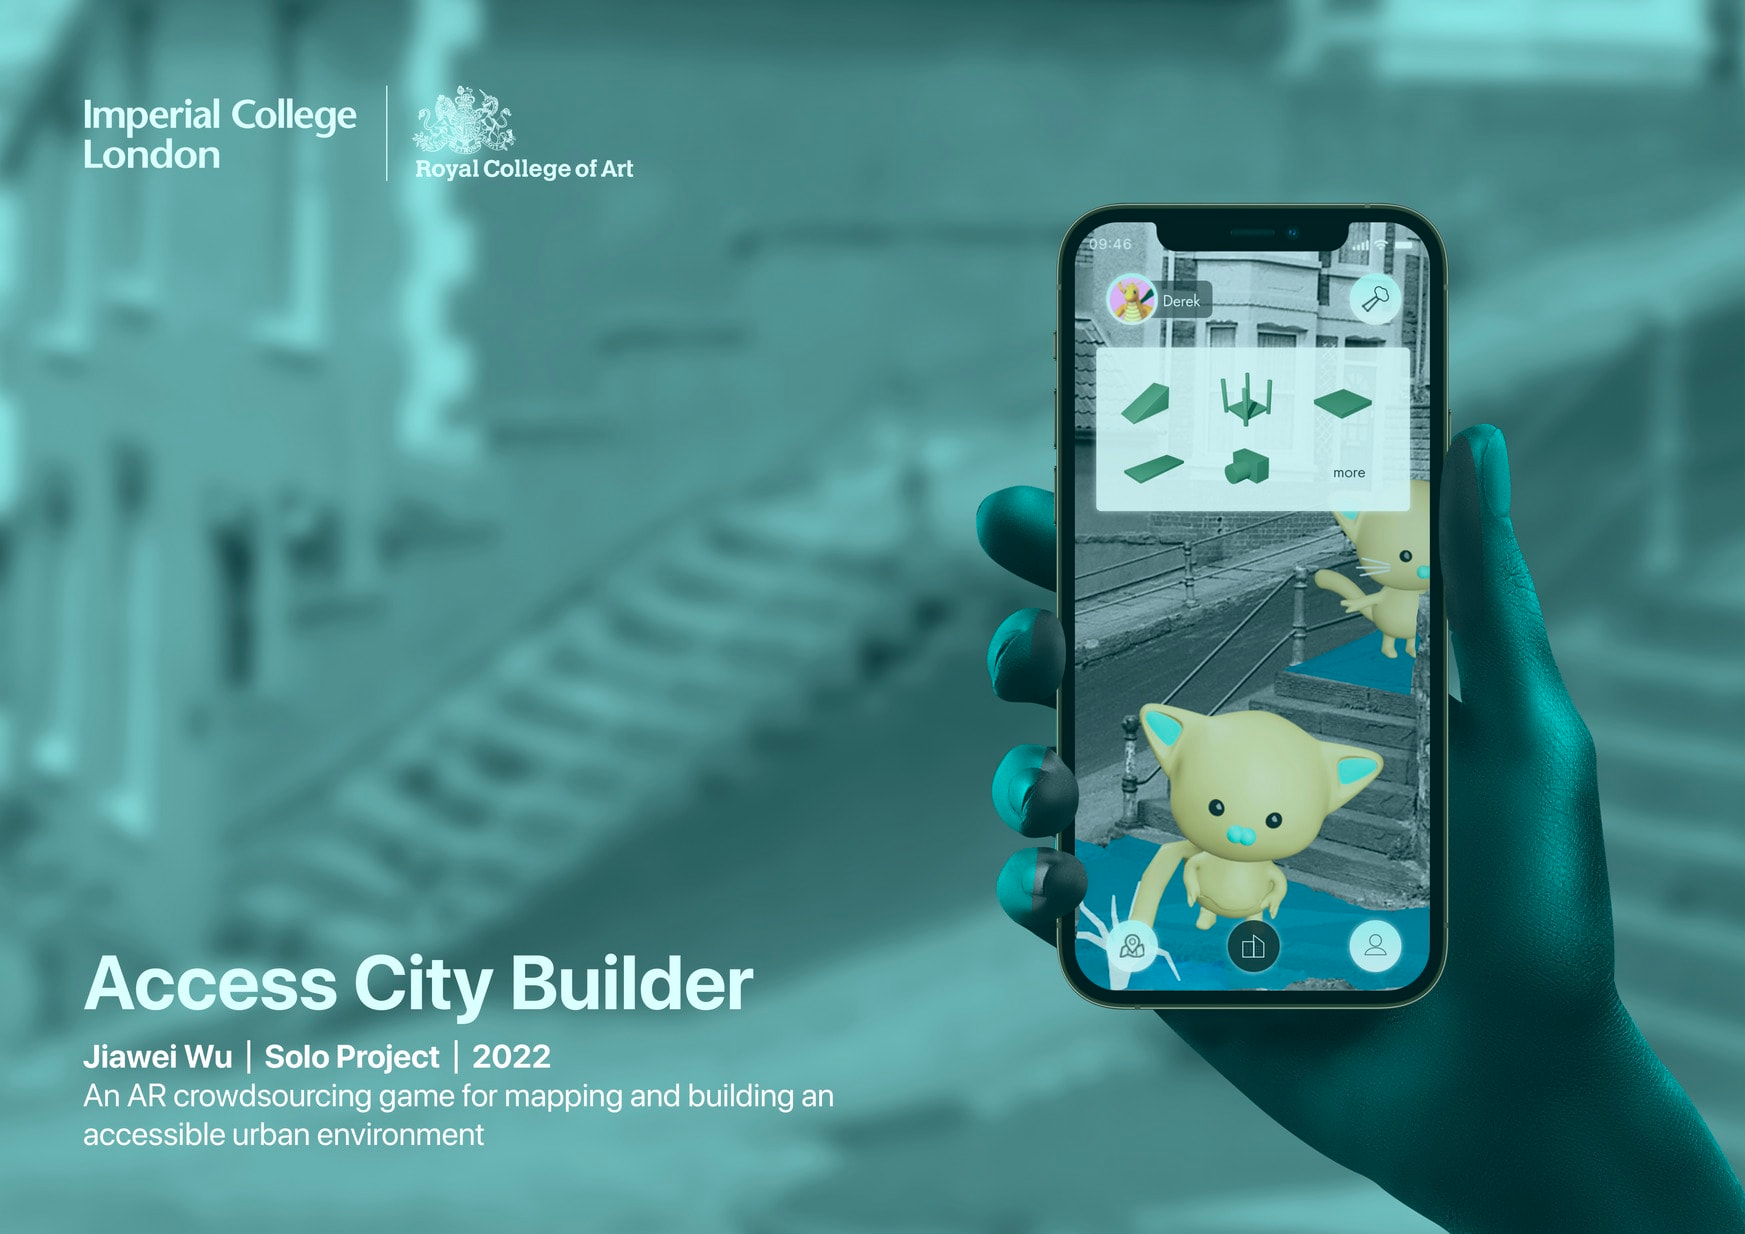 A graphic of a holding a mobile phone, its screen showing 3D animated creatures on a street, against a background of a blurry image of a street of houses and with text including ‘Access City Builder’.